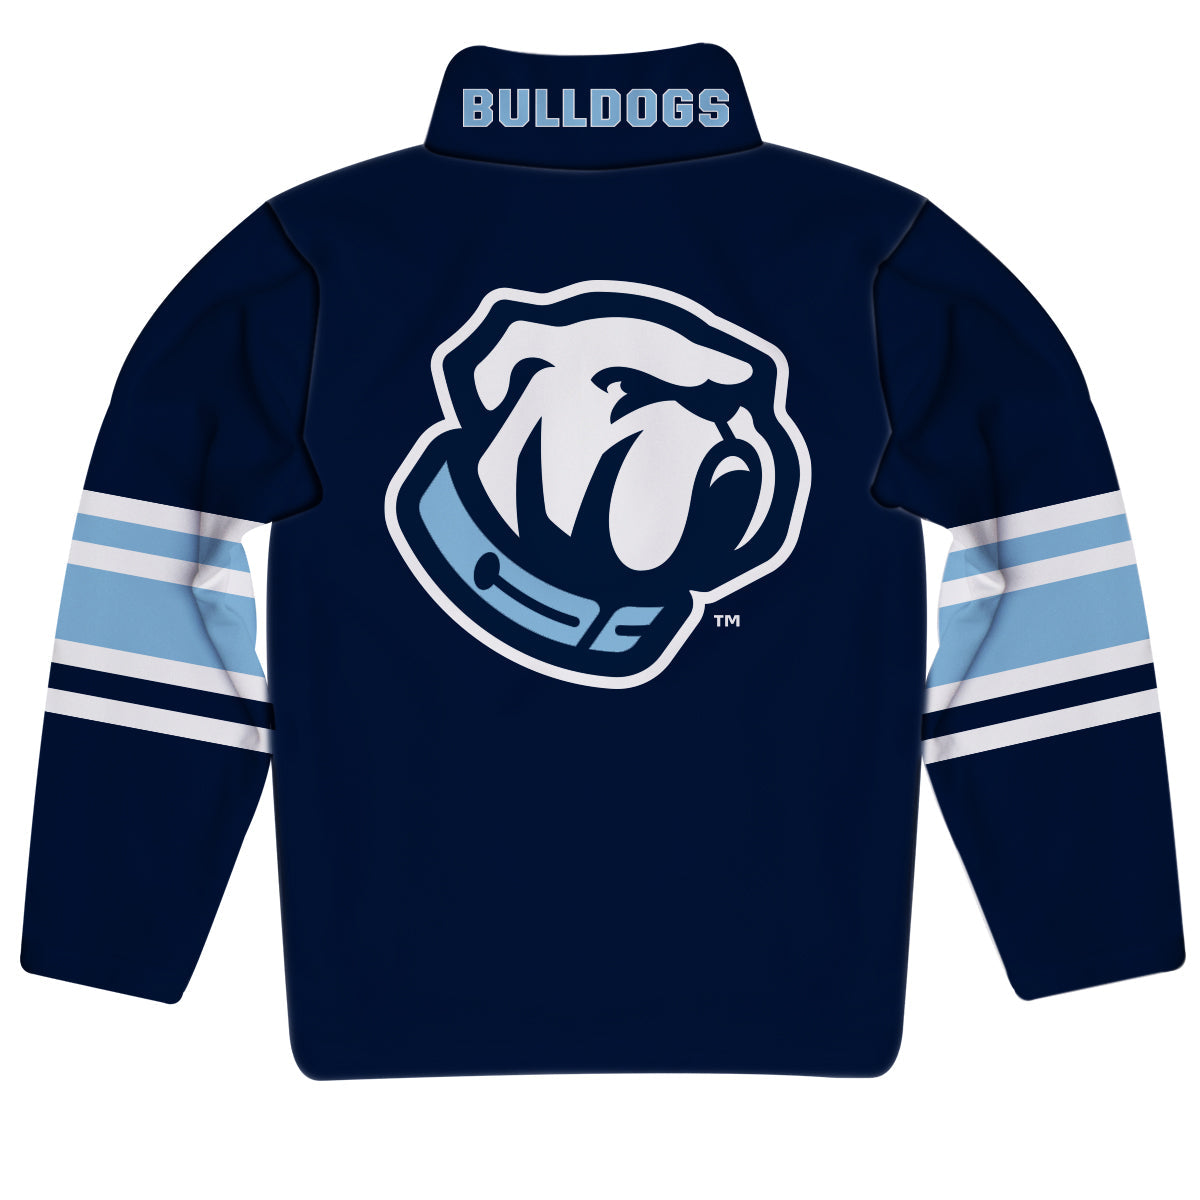 The Citadel Bulldogs Game Day Blue Quarter Zip Pullover for Infants Toddlers by Vive La Fete